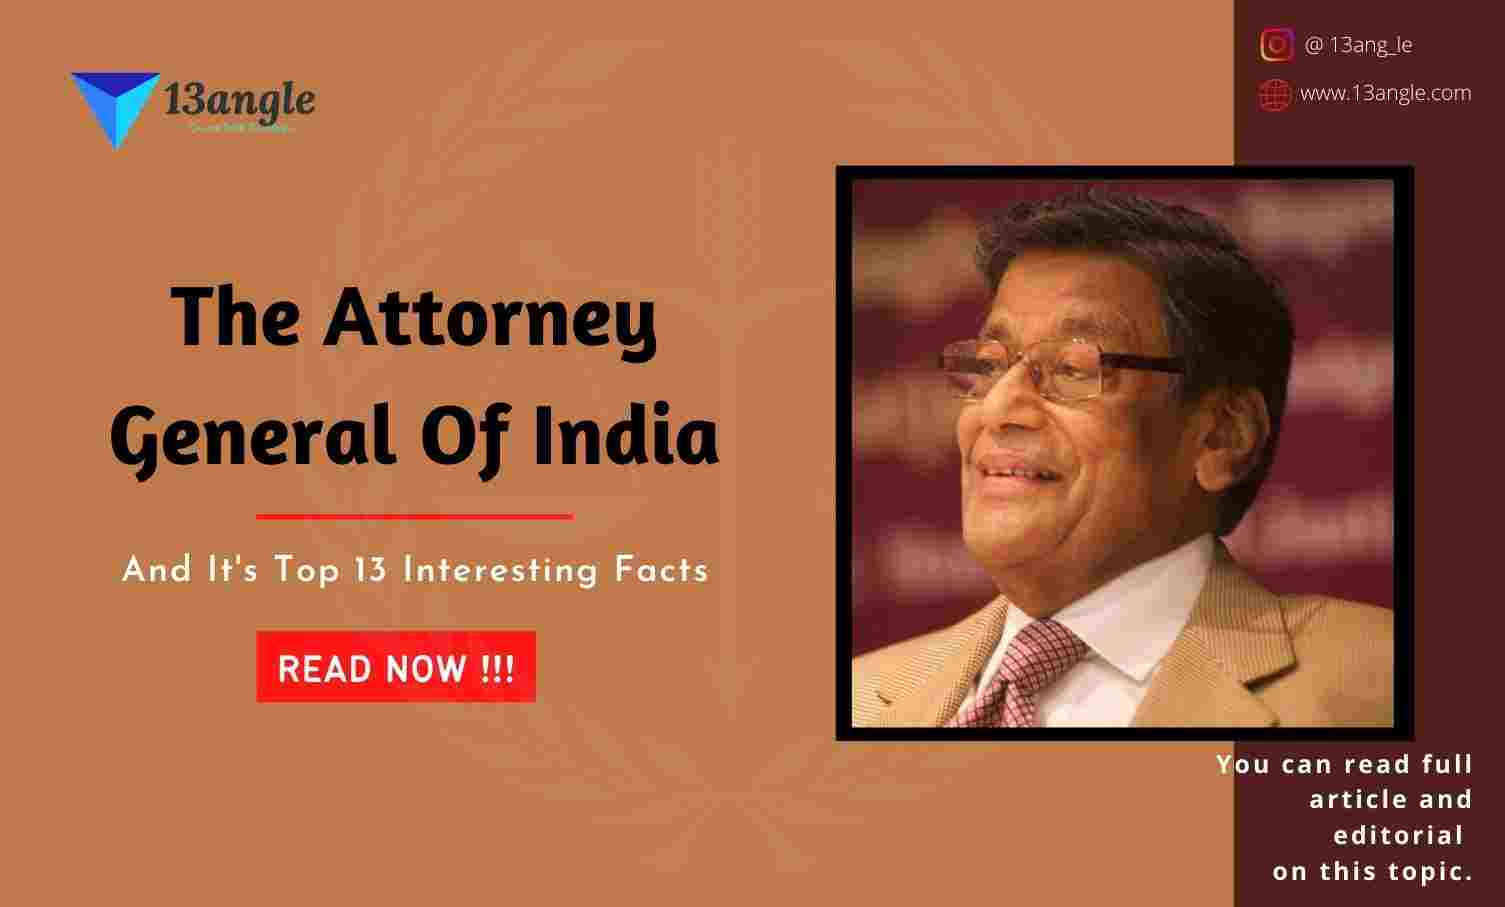 The Attorney General Of India- 13angle.com